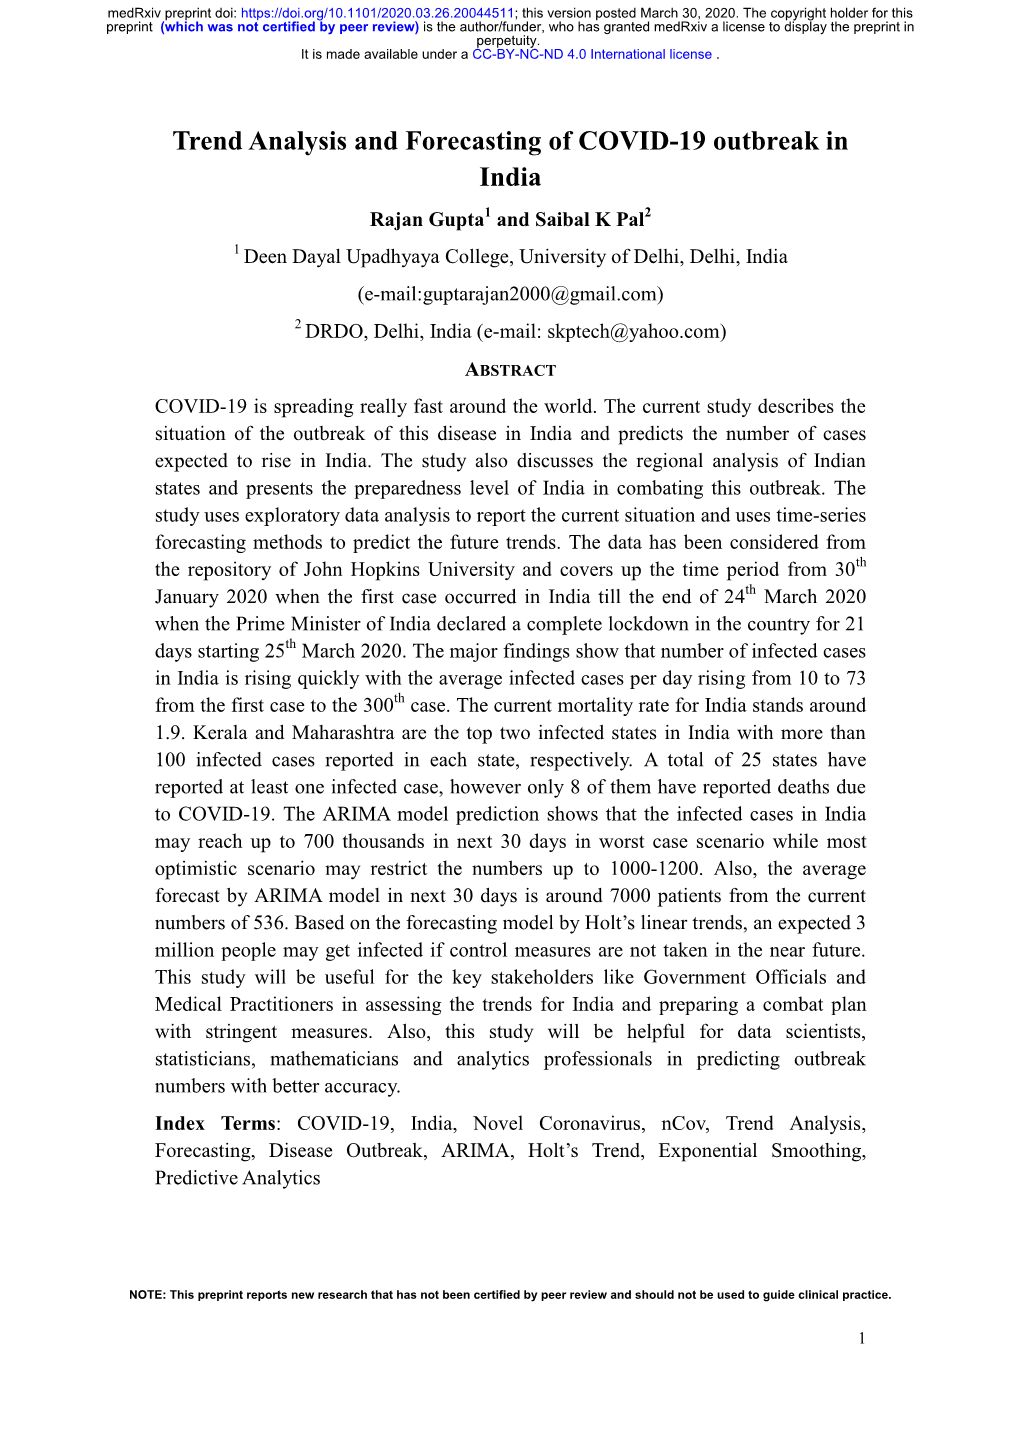 Trend Analysis and Forecasting of COVID-19 Outbreak in India